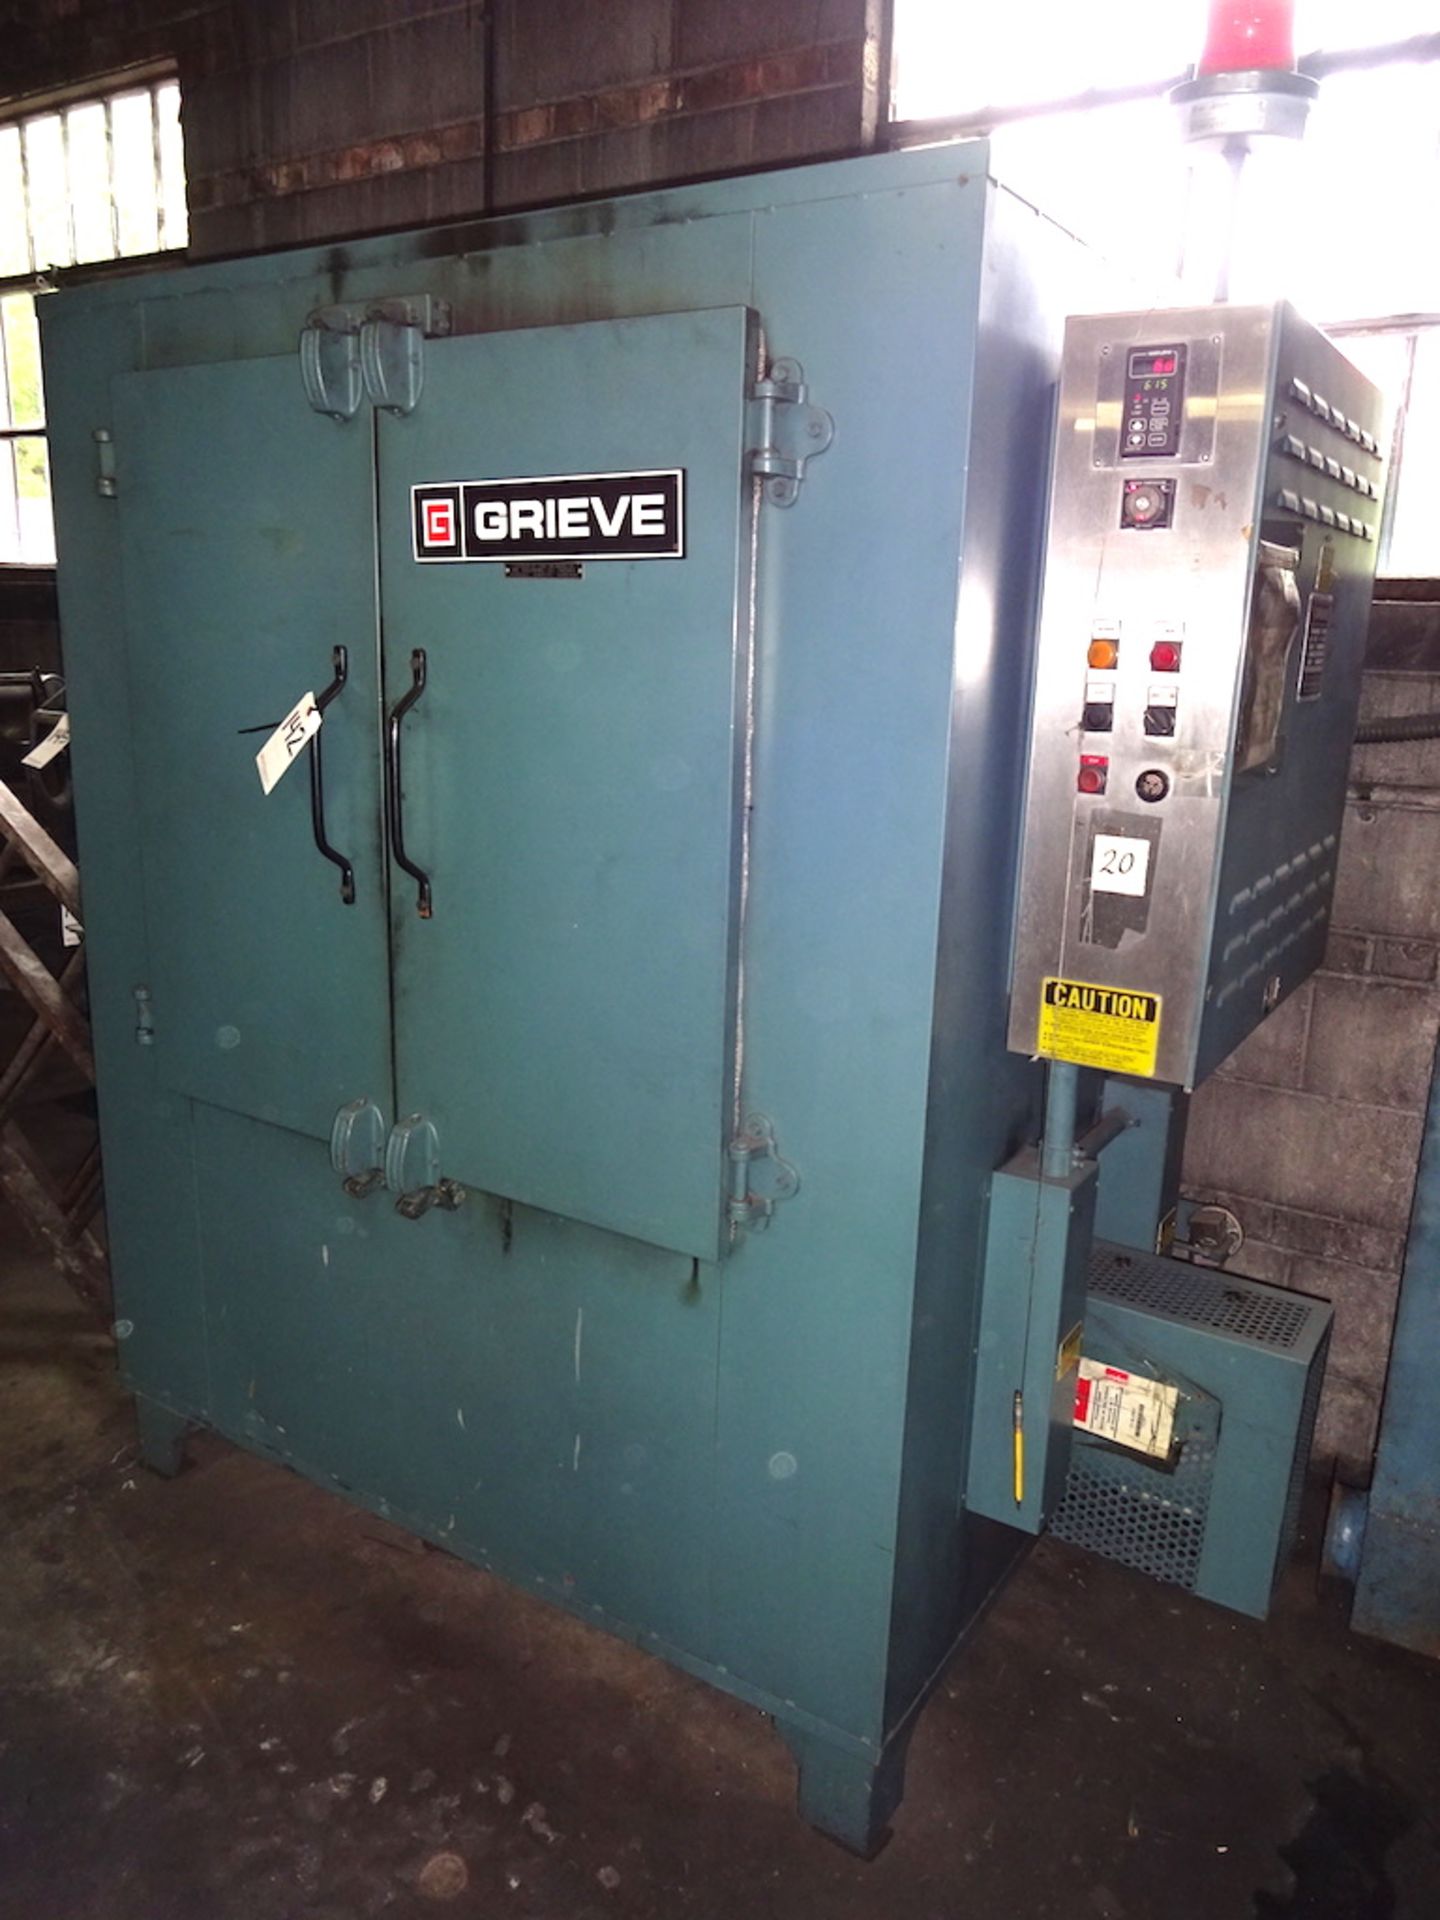 Grieve Model Modified HB-850 Electric Oven, S/N 510 398, 850 Degrees F Max. Temperature, 38 in. x 38